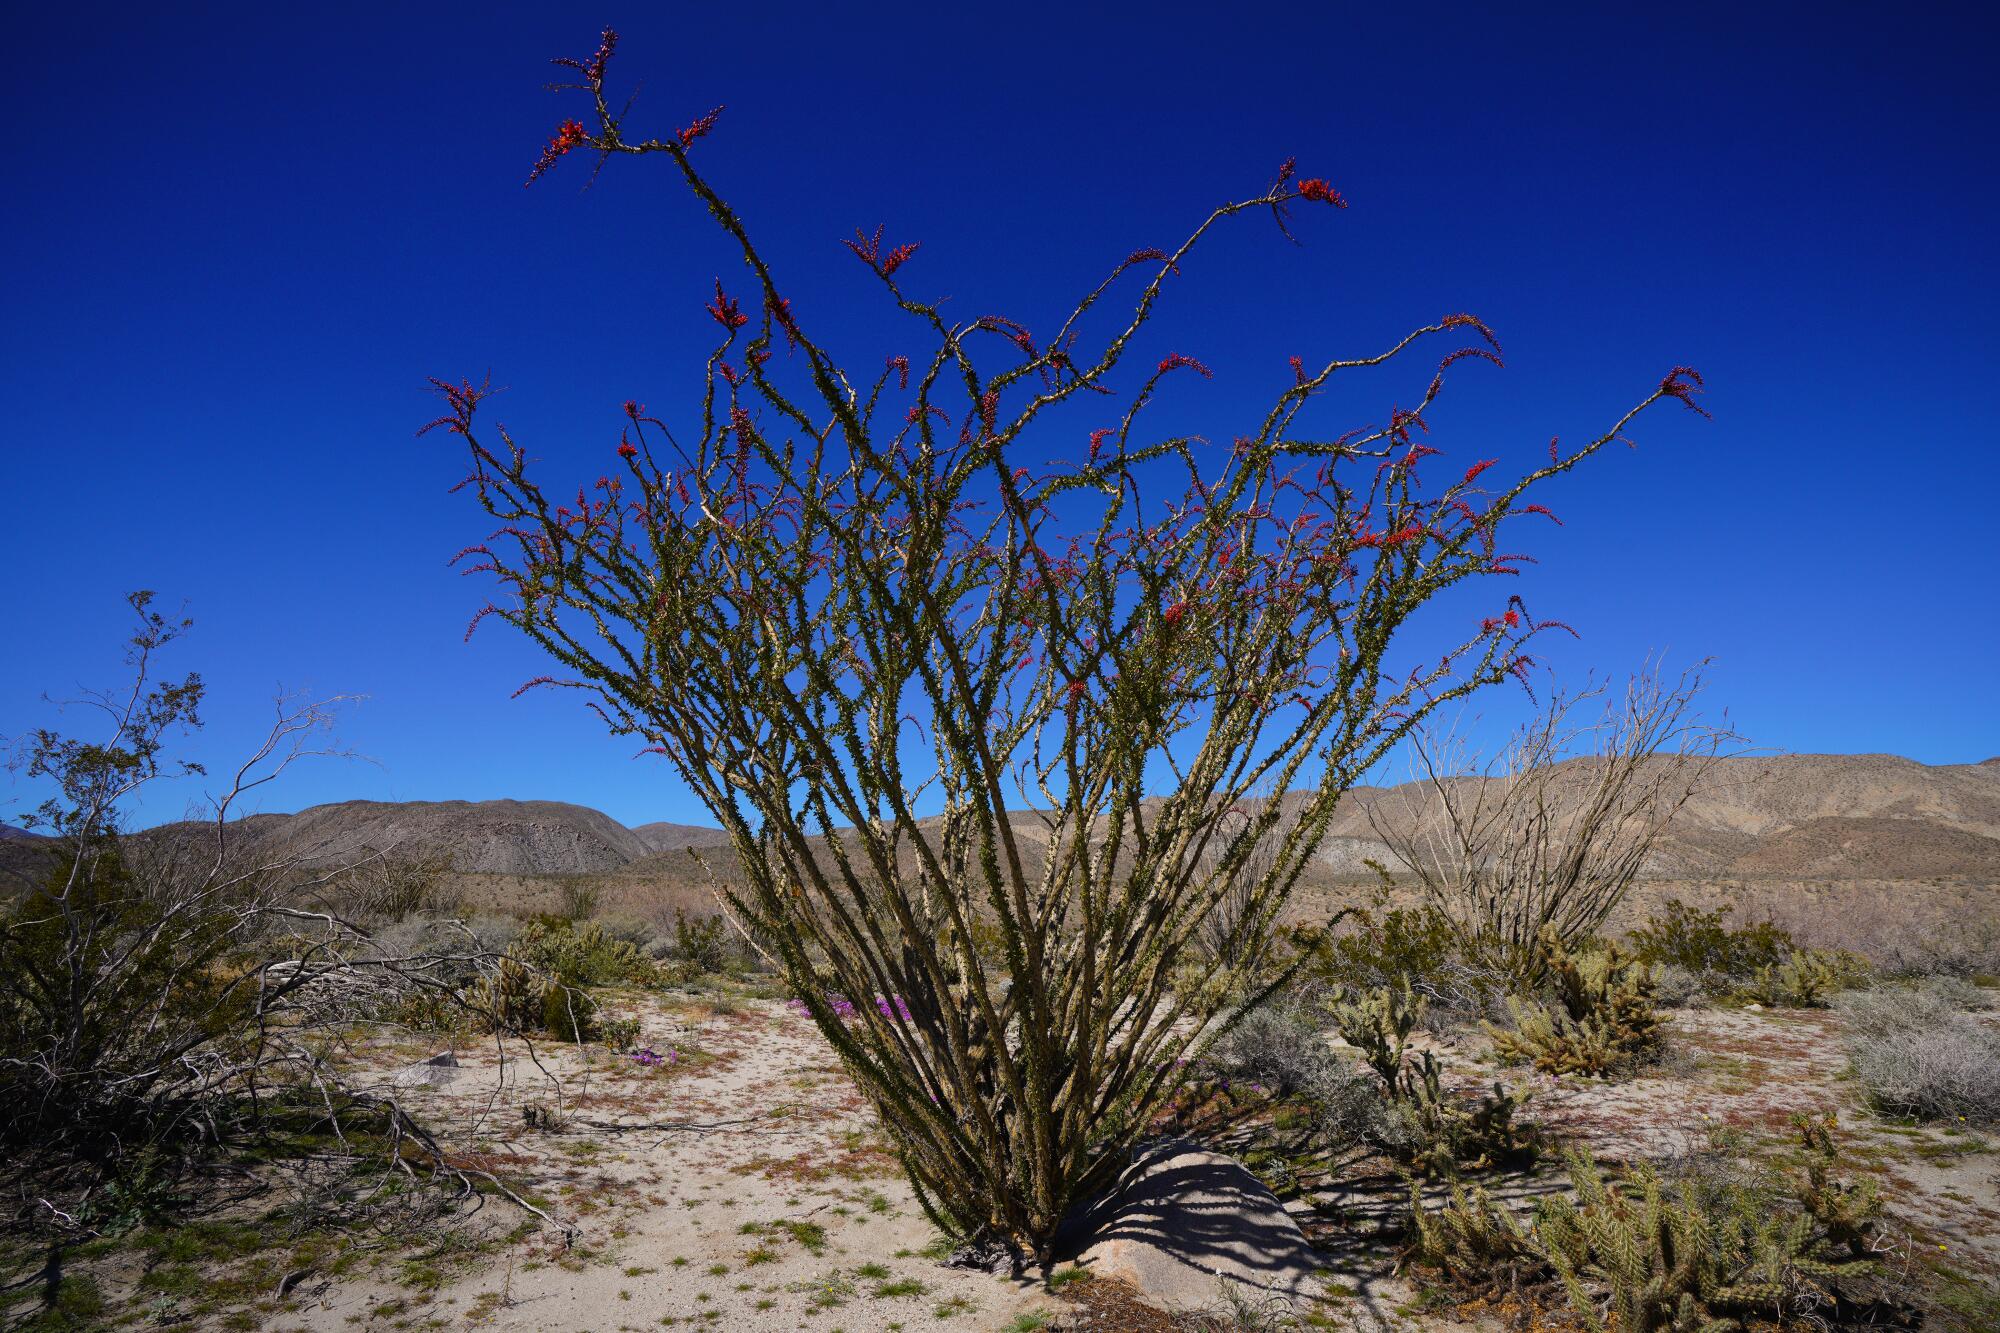 Ocotillo with its red buds near their blooming period at Anza-Borrego Desert State Park on March 7.